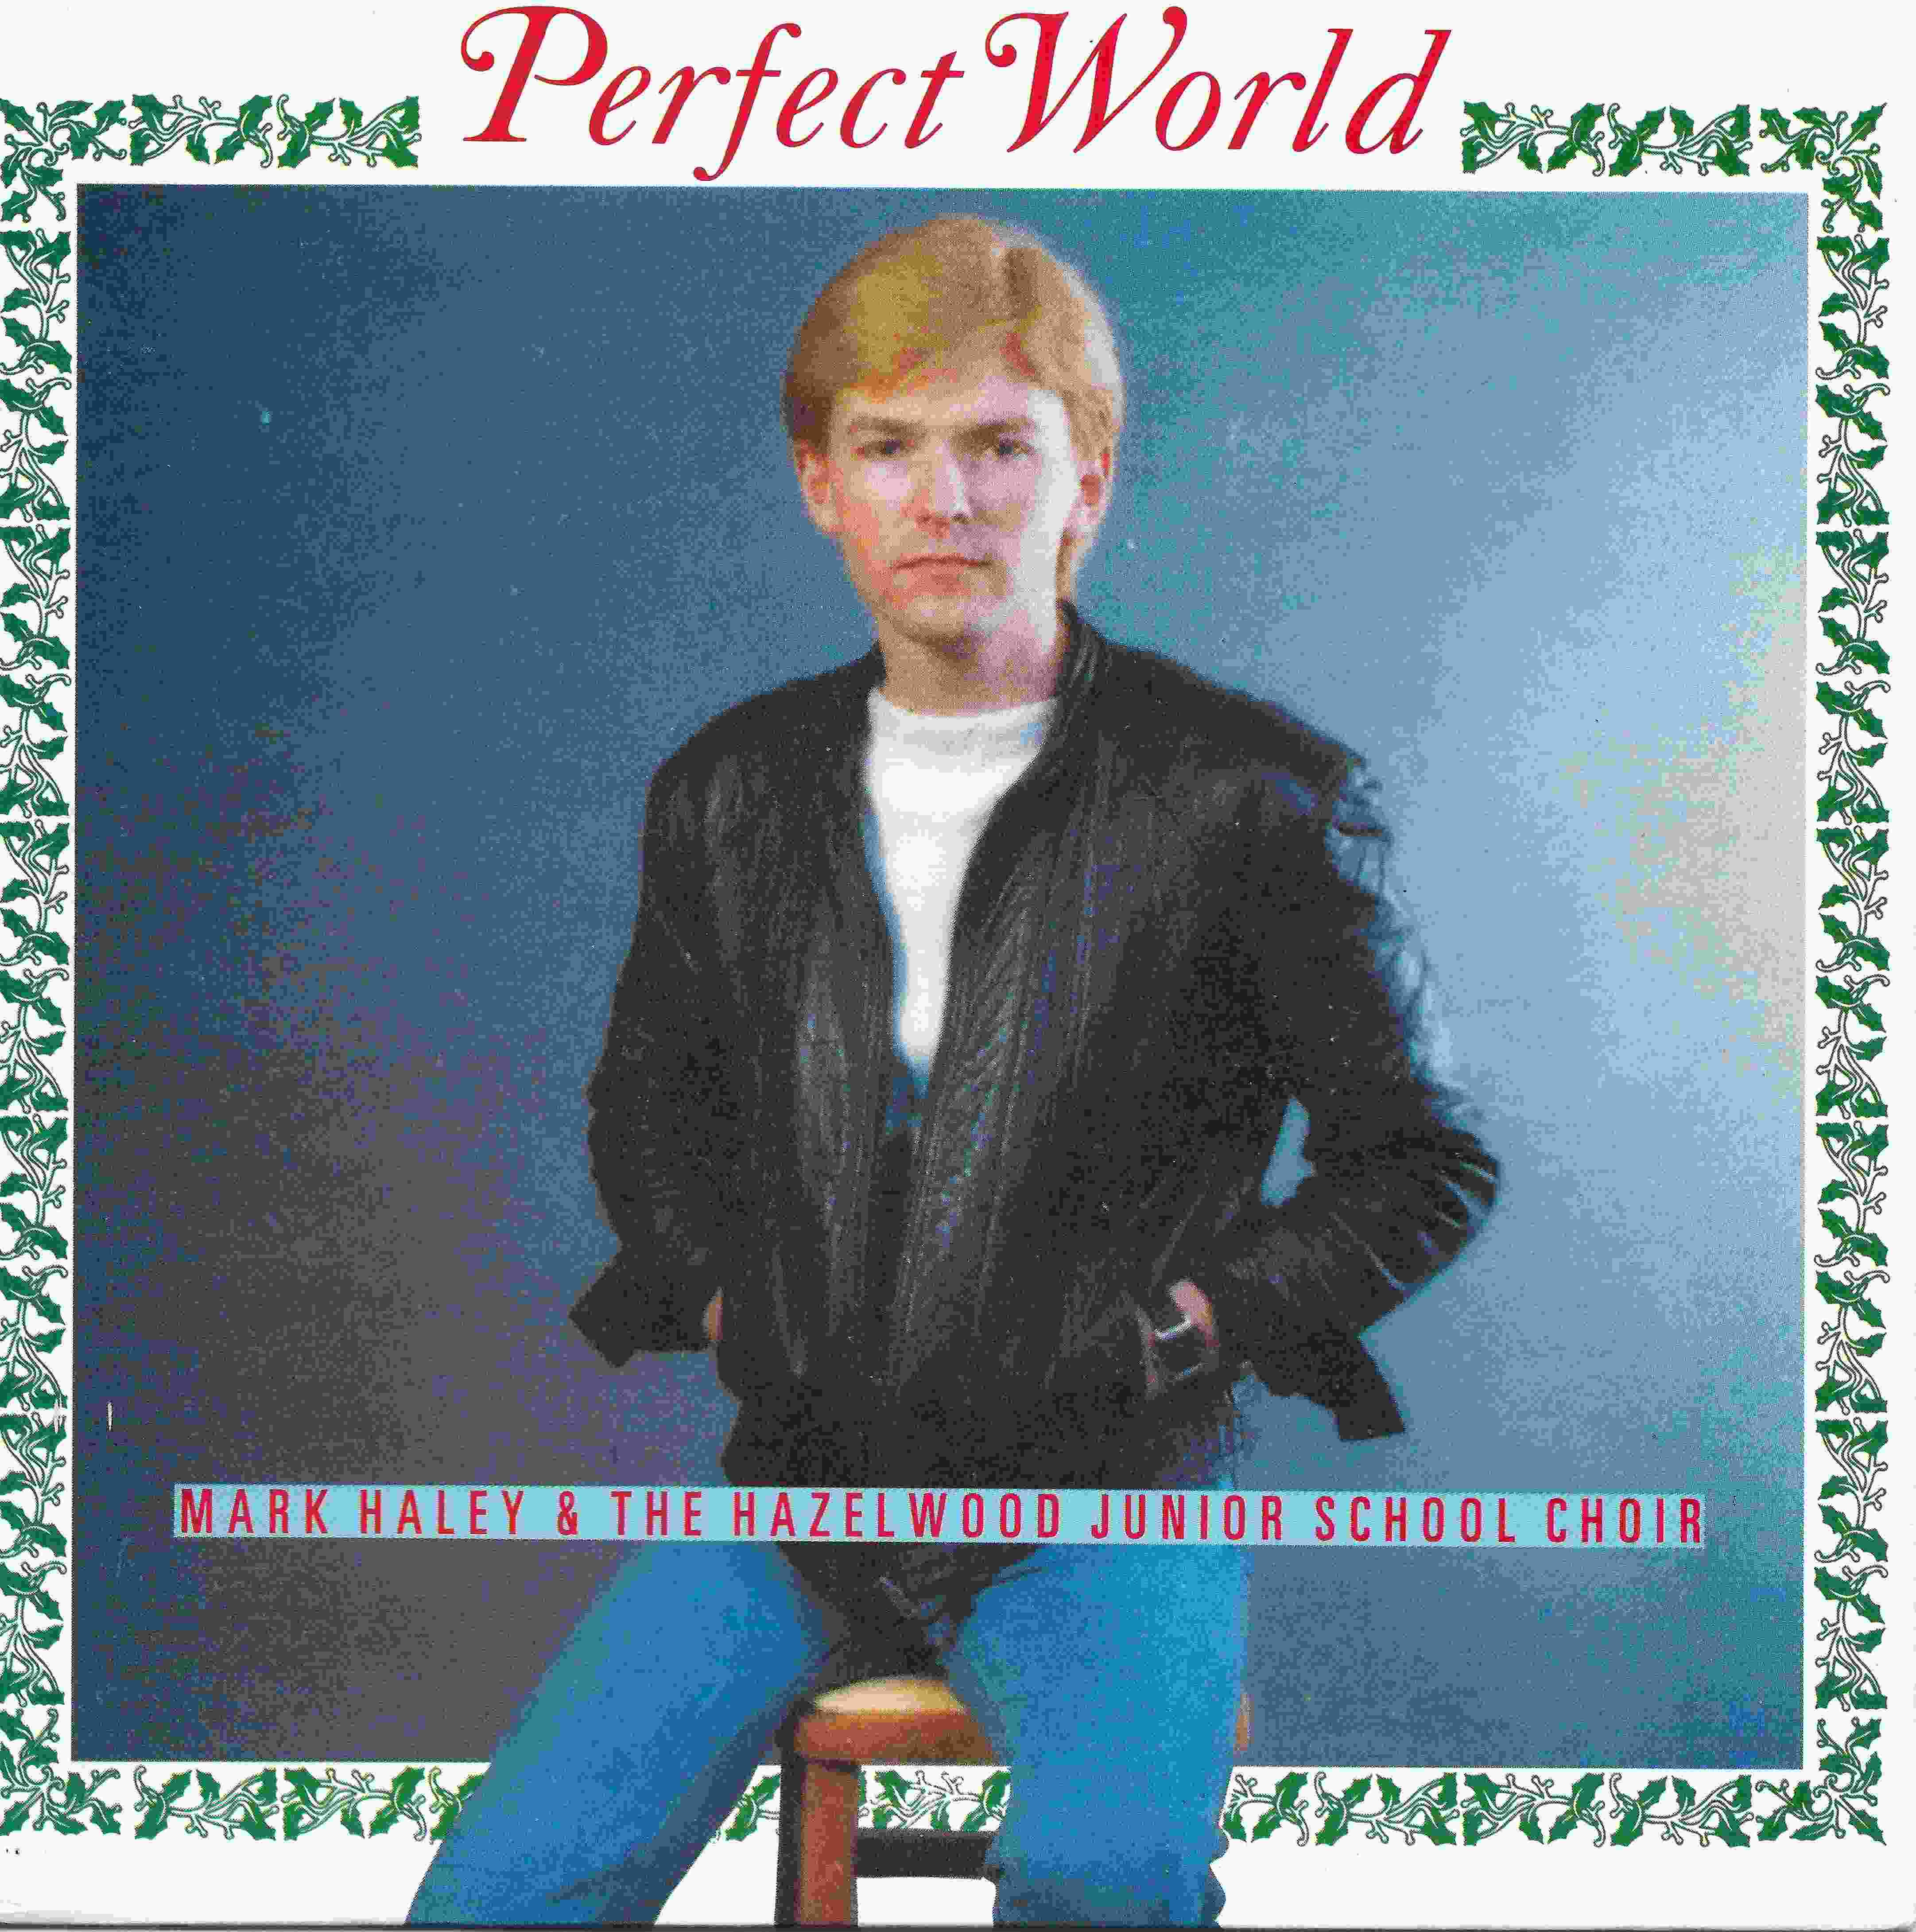 Picture of Perfect world by artist Mark Haley & The Hazlewood Junior School Choir from the BBC singles - Records and Tapes library